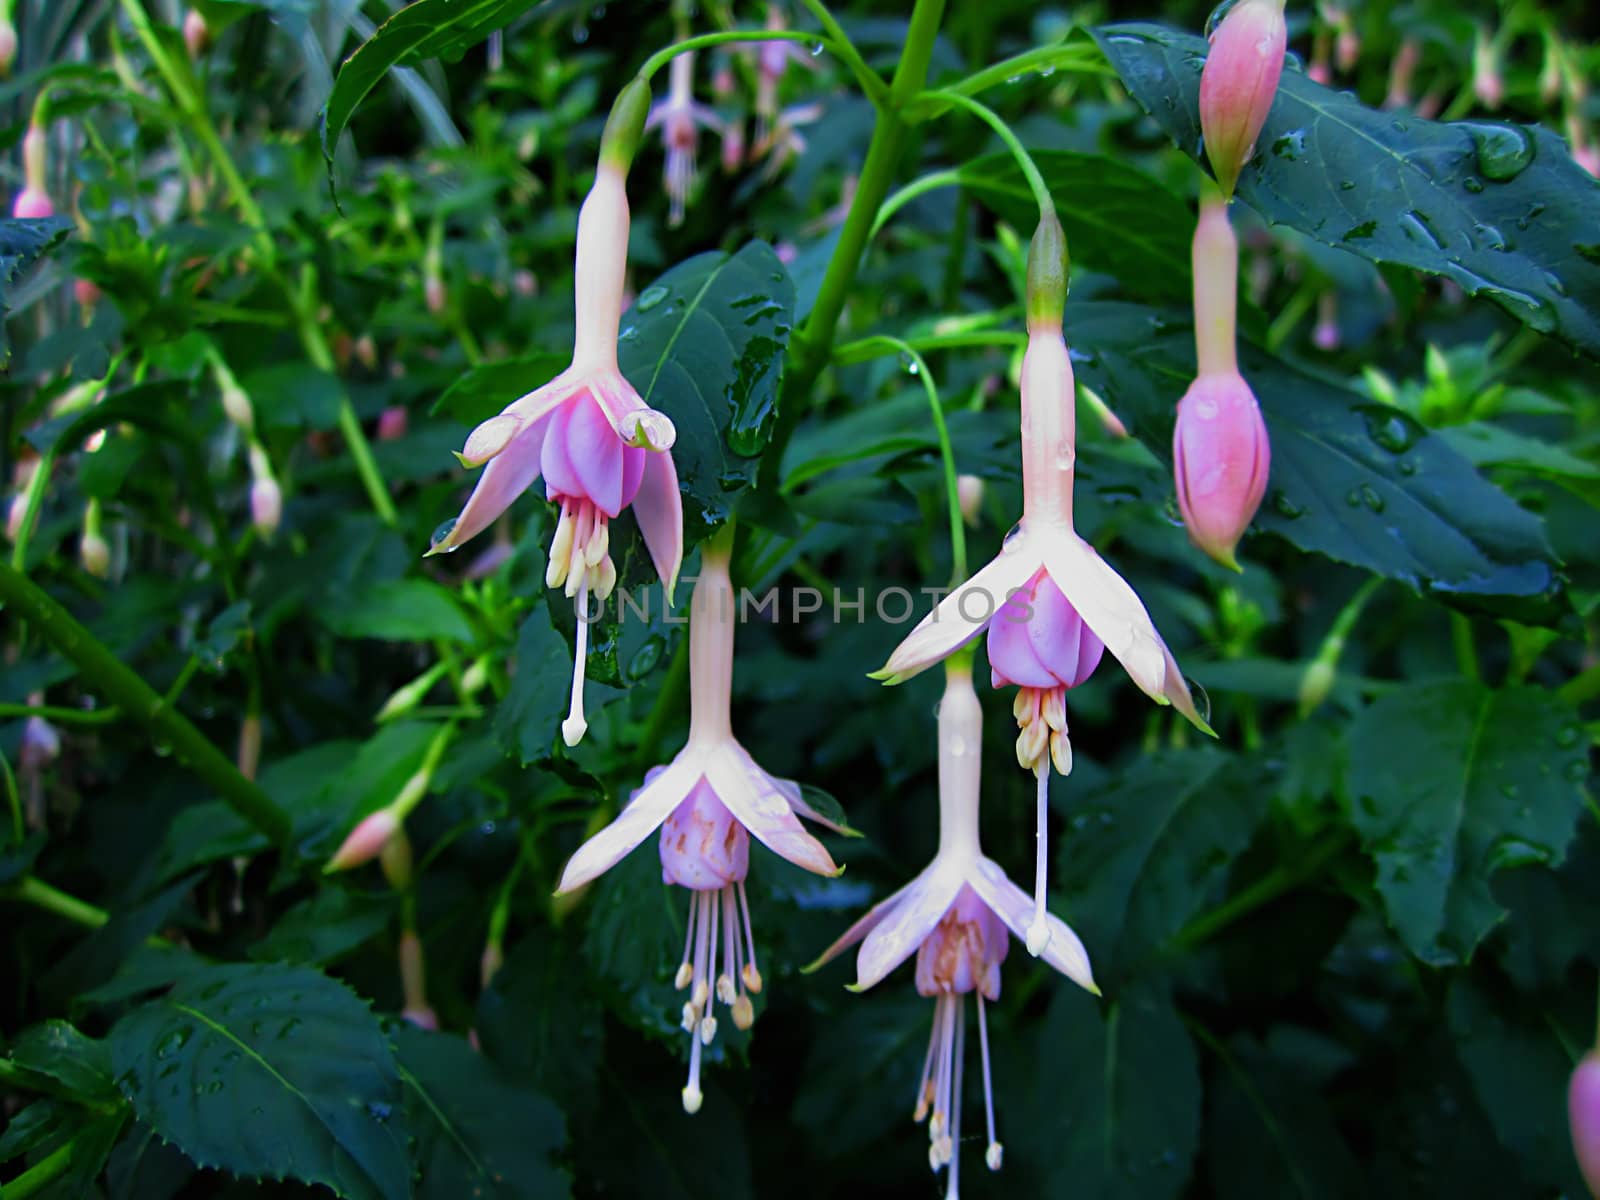 Hummingbird Fuchsia (Latin Name: Fuchsia magellanica) is a flowering shrub of the Evening Primrose family.  It is native to Argentina, Chile, Paraguay and Uruguay.